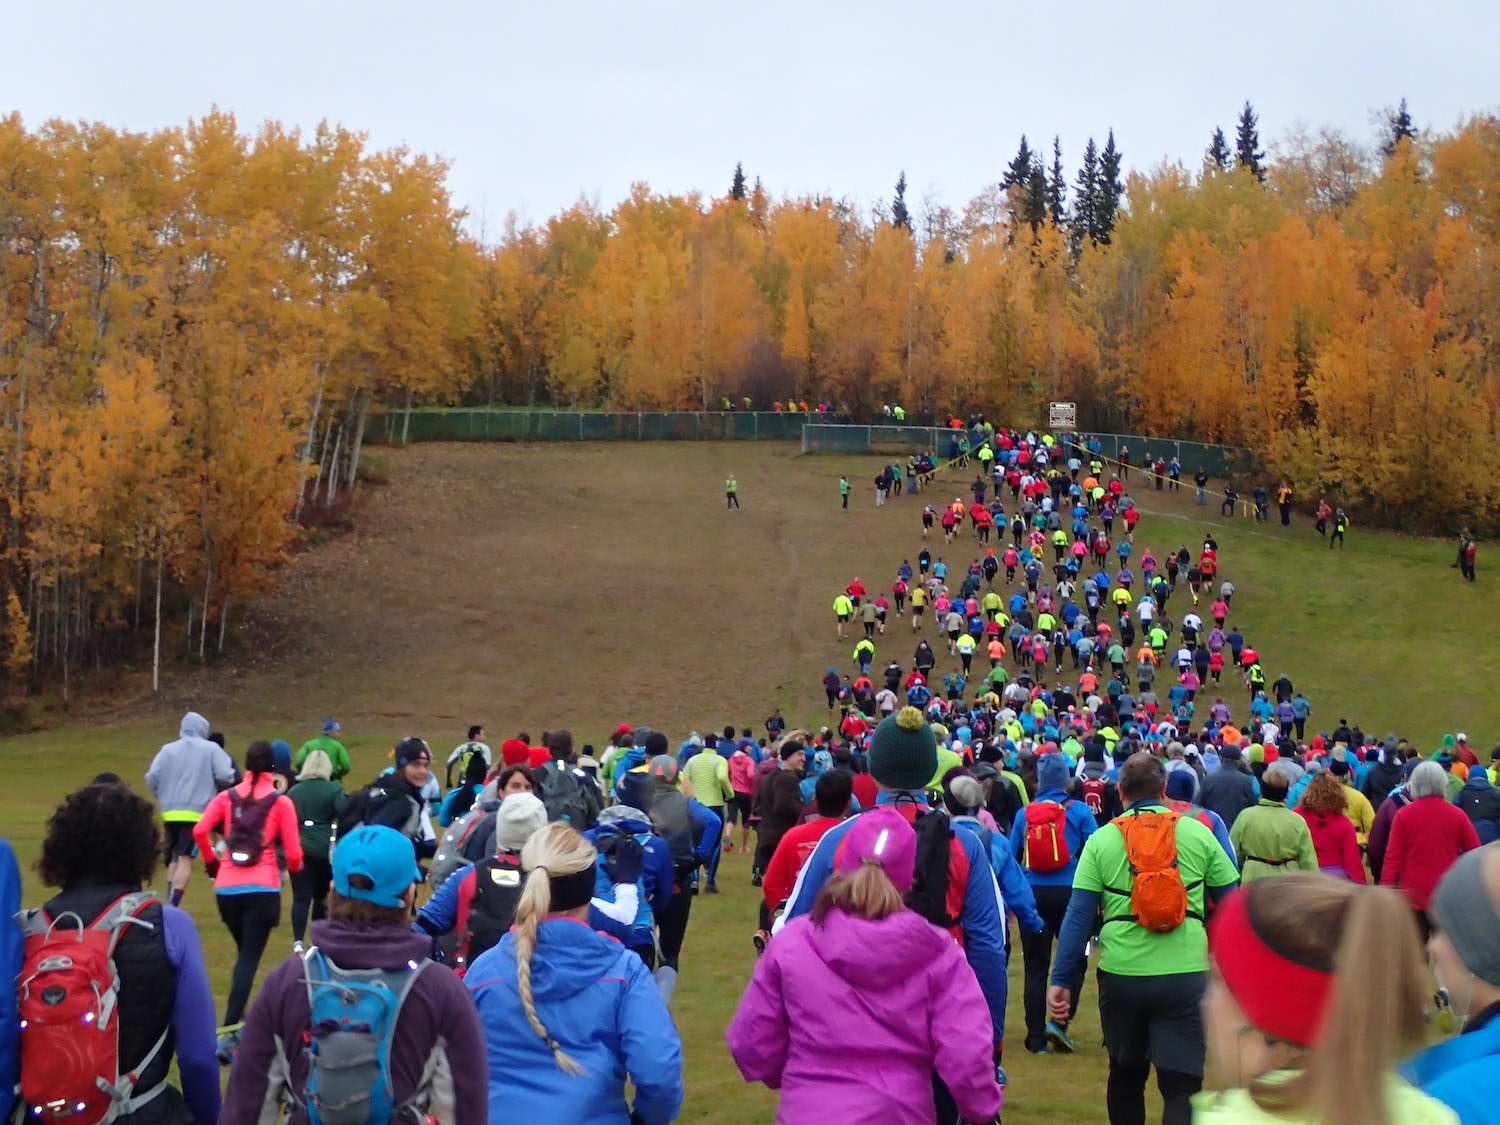 Runners, many in bright clothing, climb a grassy hill set about with aspen and birch trees in golden fall colors.